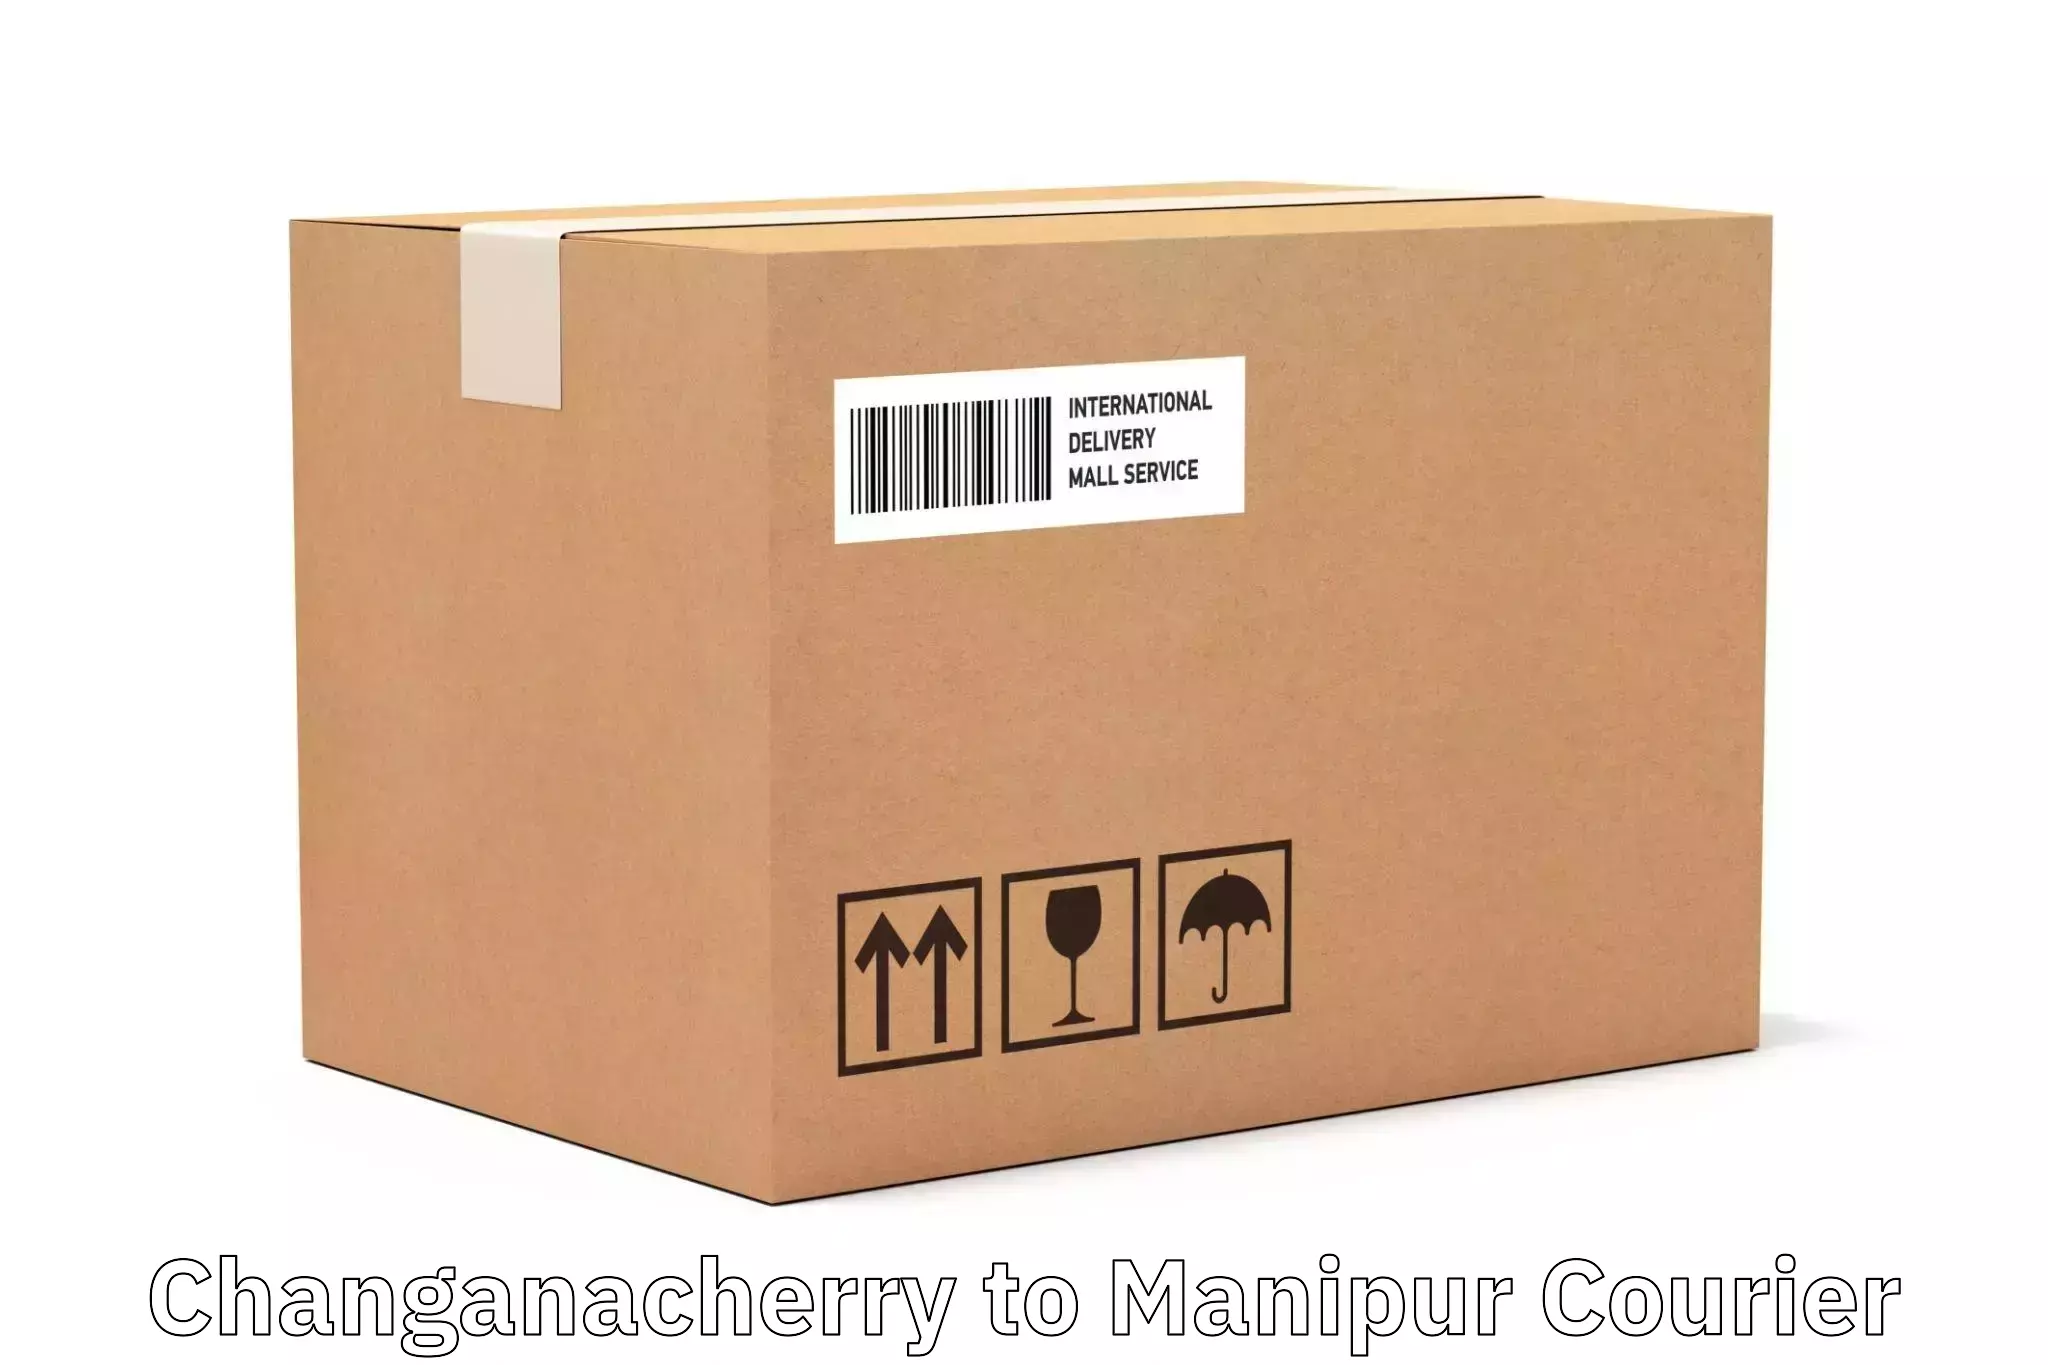 Flexible parcel services in Changanacherry to Chandel